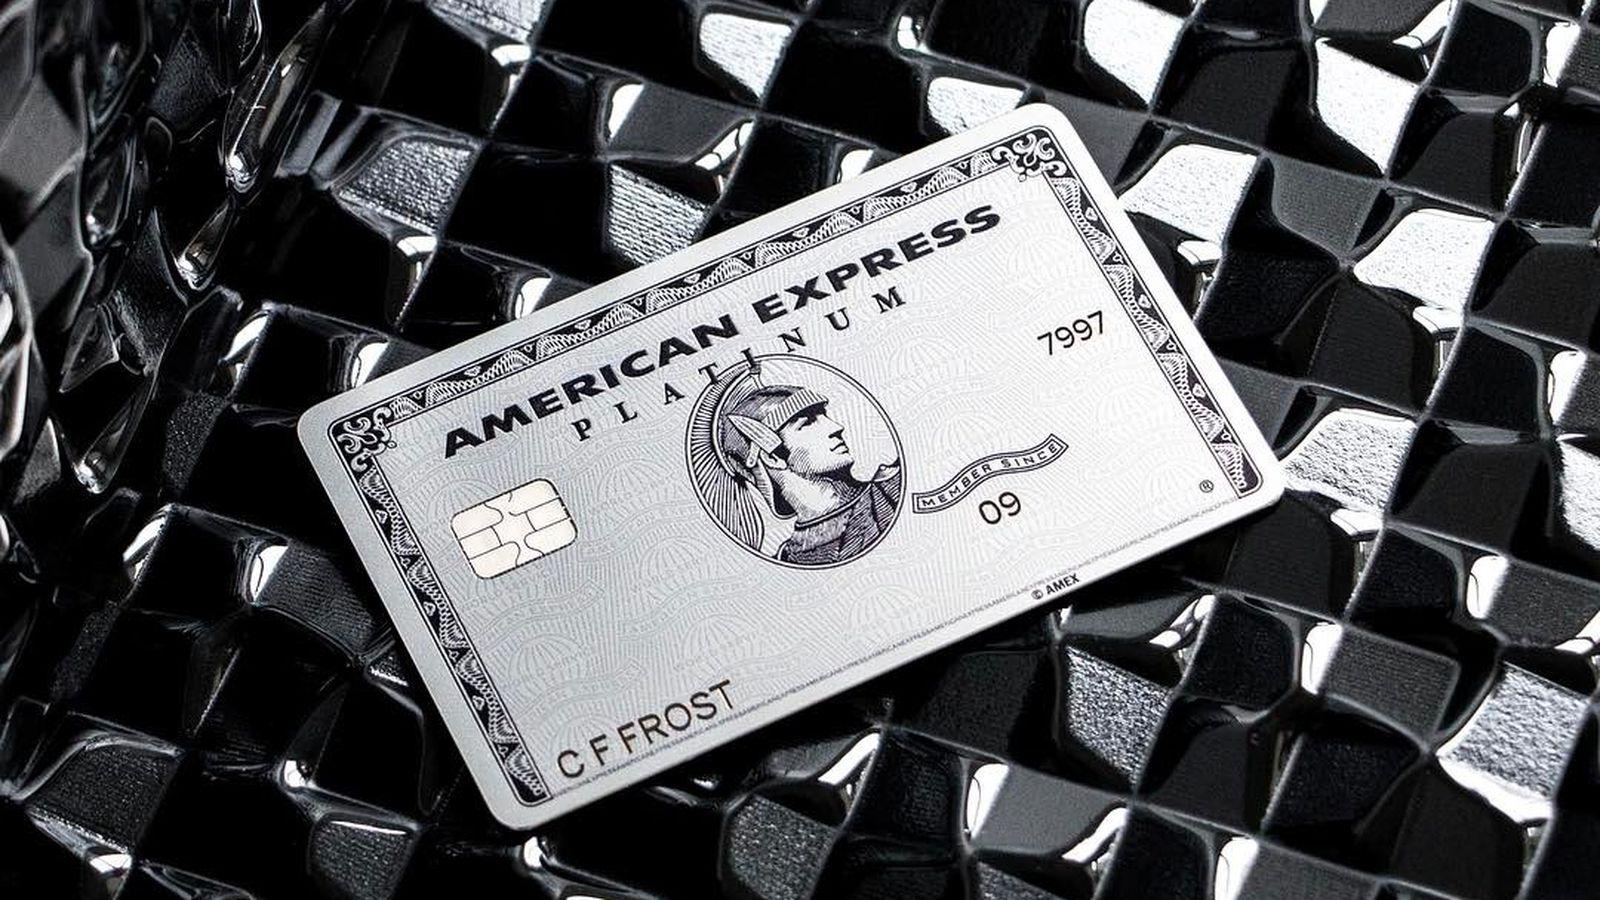 The latest American Express deals to know about - Point Hacks